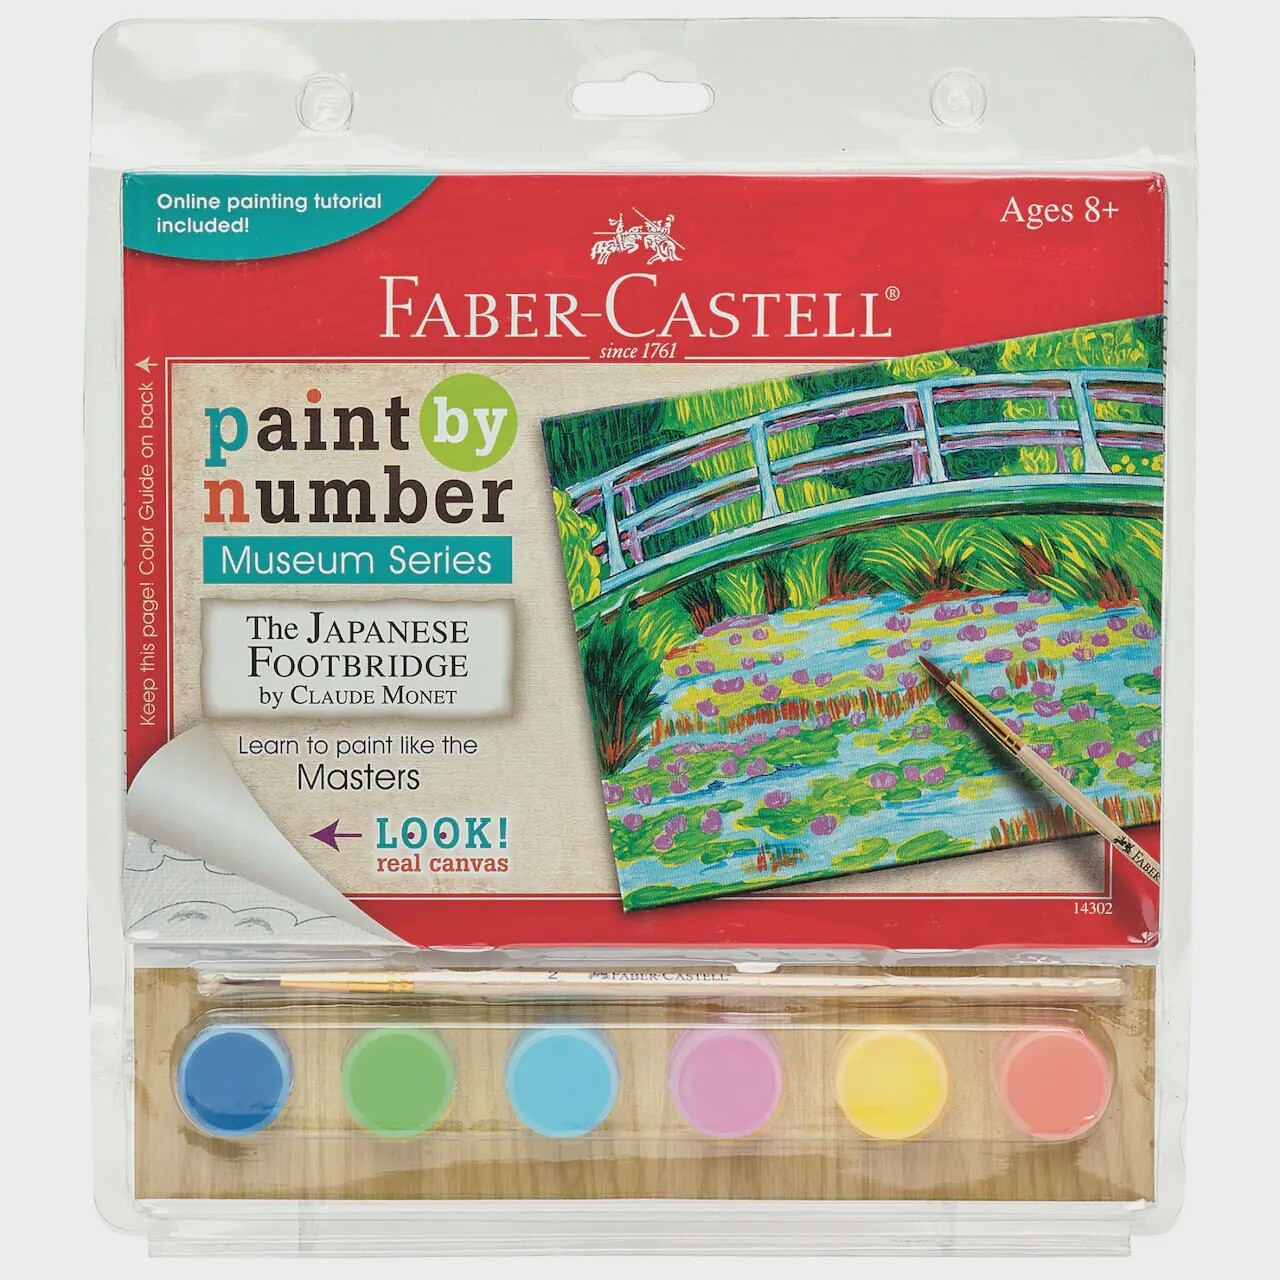 Faber-Castell Paint By Number Museum Series The Japanese Footbridge